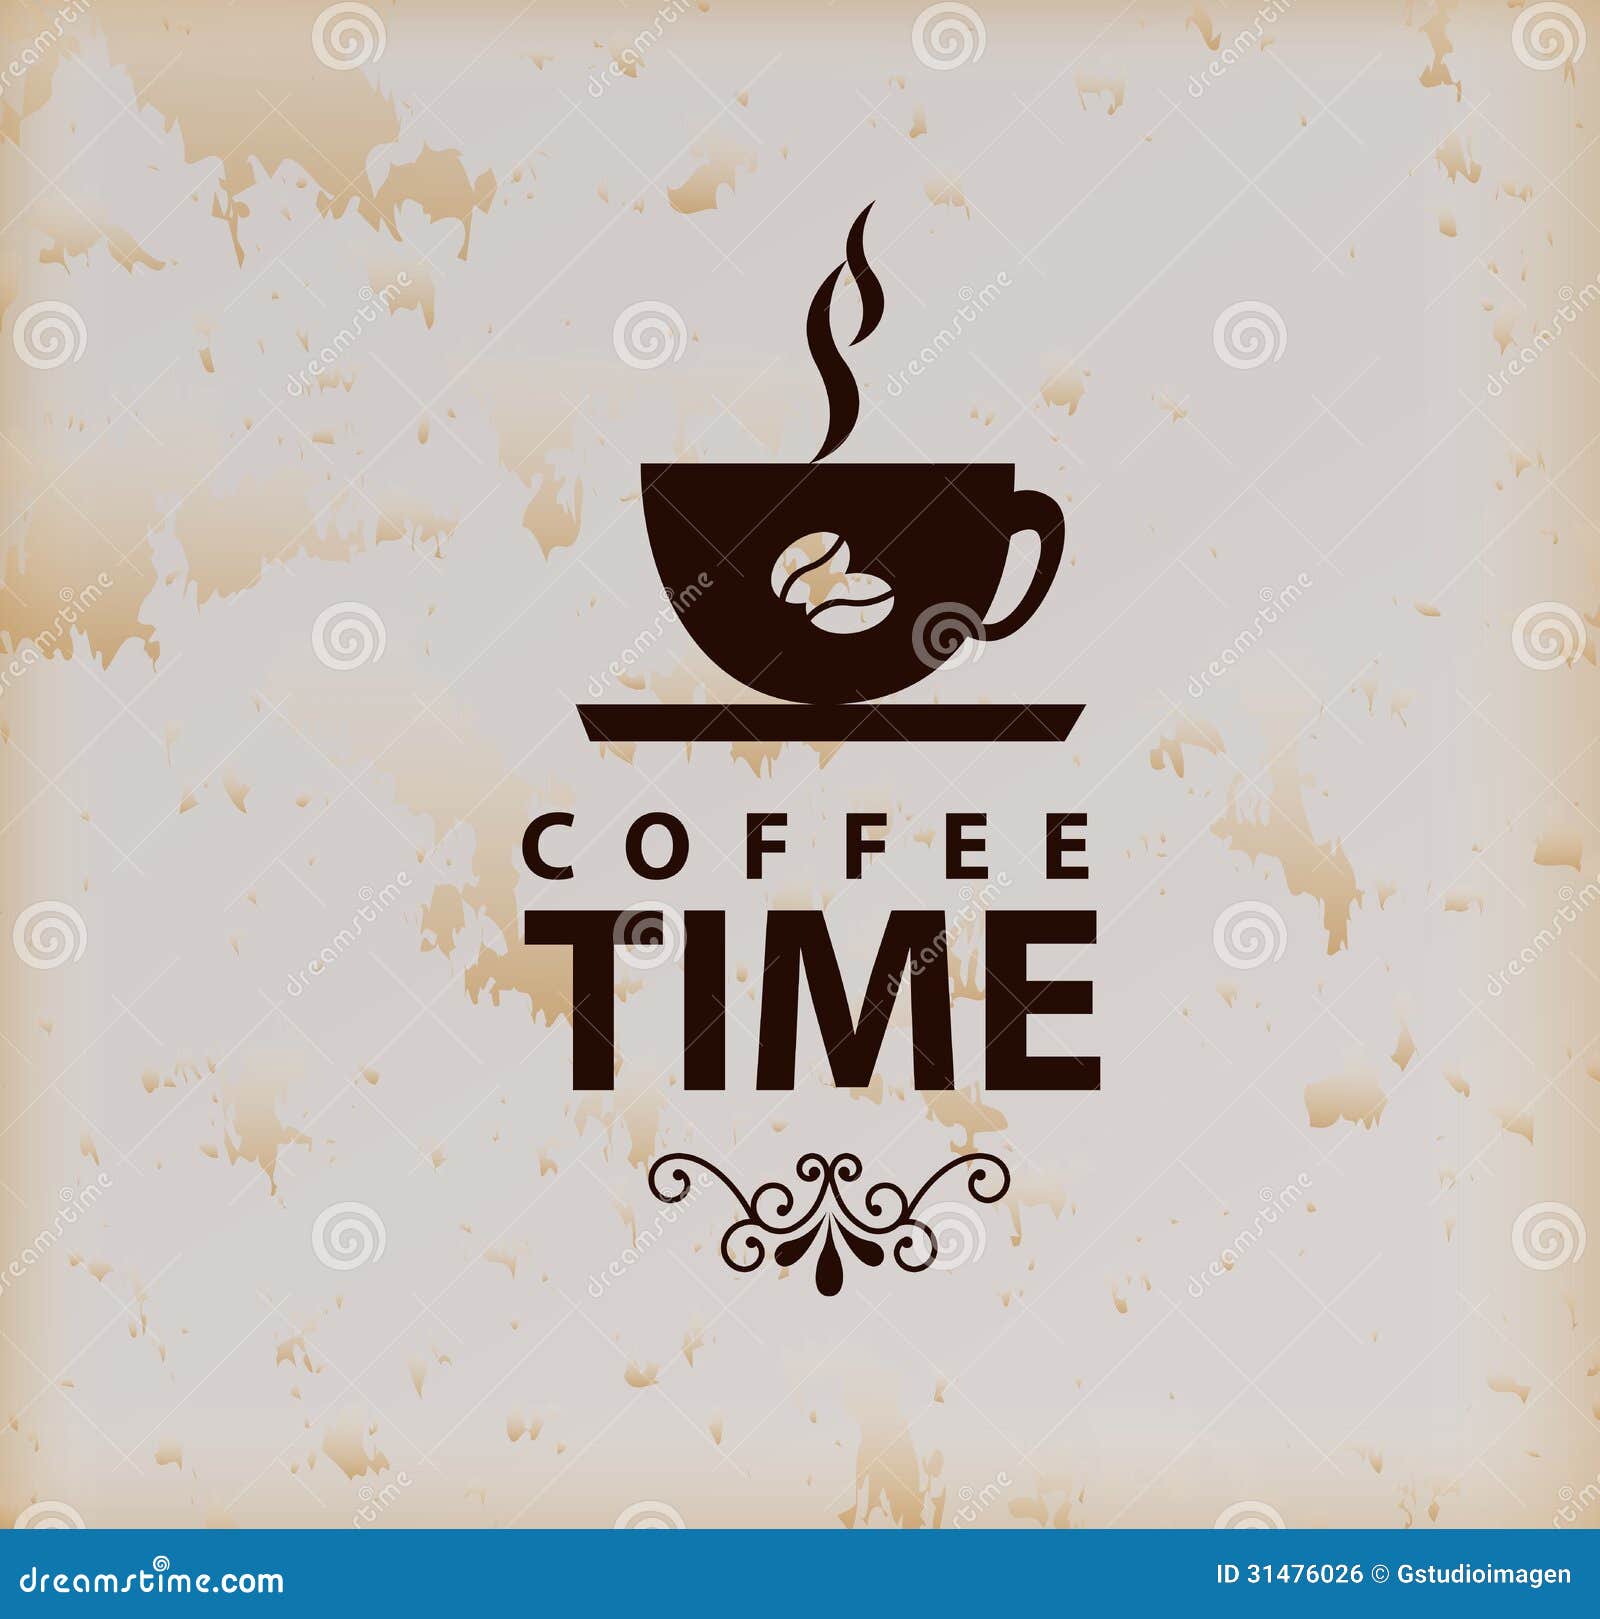 free clipart coffee hour - photo #41